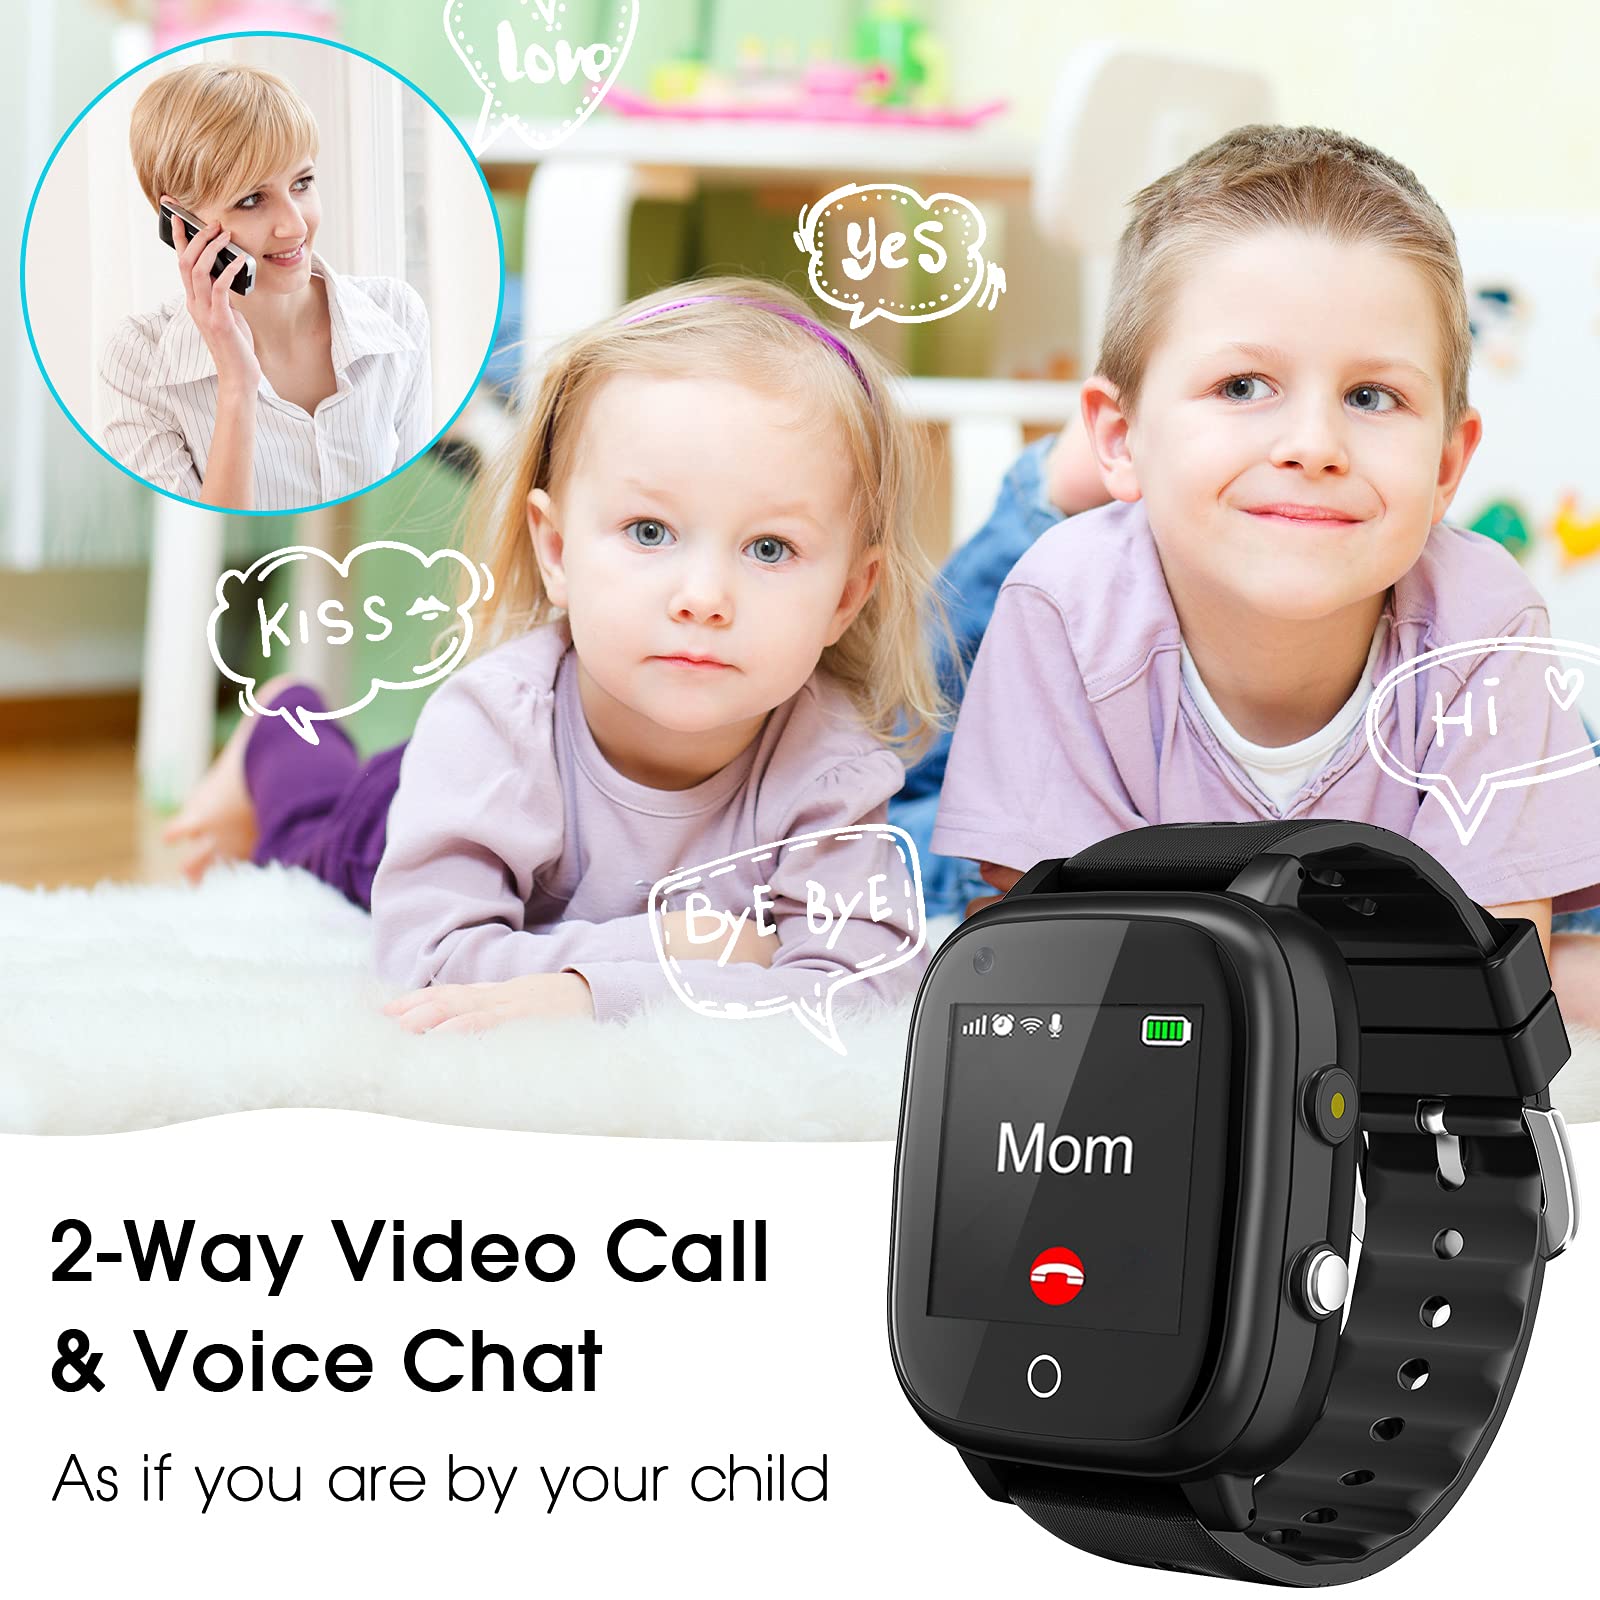 cjc 4G Kids Smart Watch with GPS Tracker and Calling, 2-Way Call Voice & Video Chat SOS Alarm WiFi Waterproof Kid Cell Phone Wrist Watch for 3-12 Girls Boys Christmas Birthday Gifts